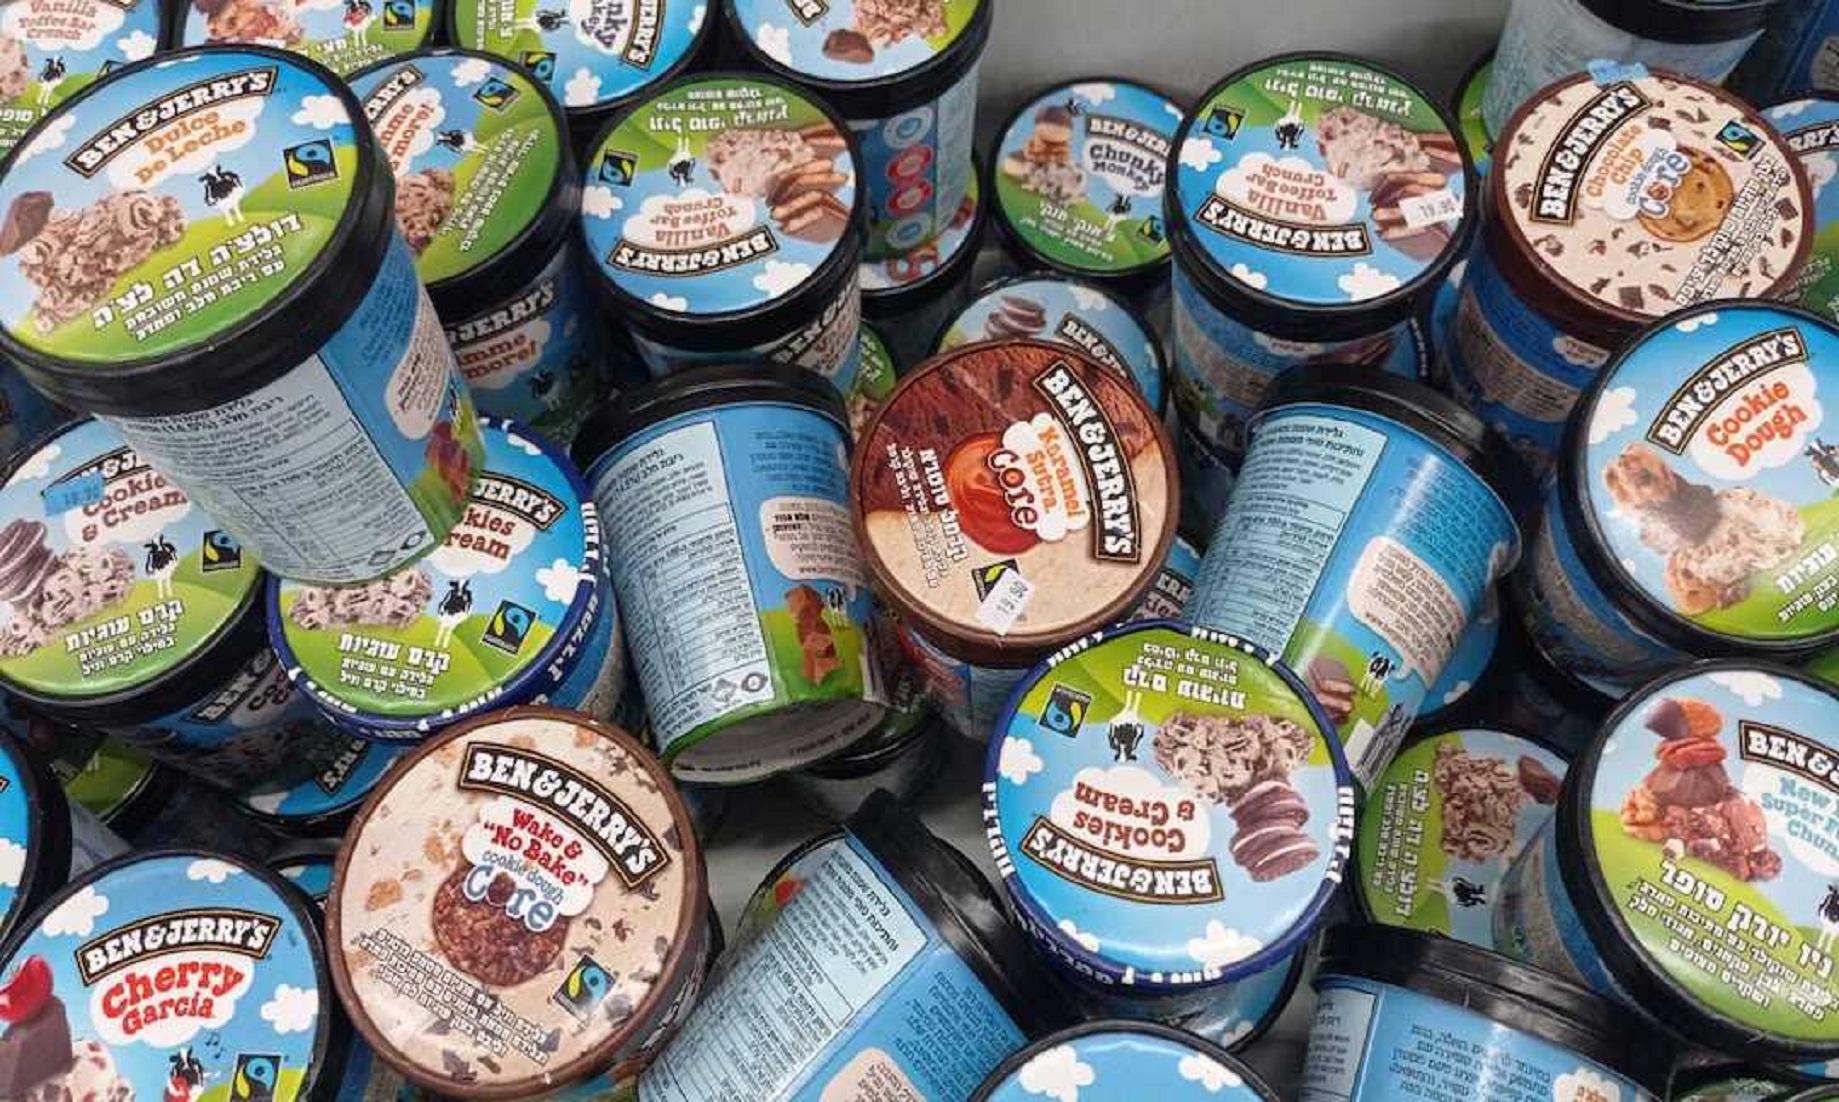 Palestine Hails Ben & Jerry’s Decision To Stop Sales In Israeli Settlements